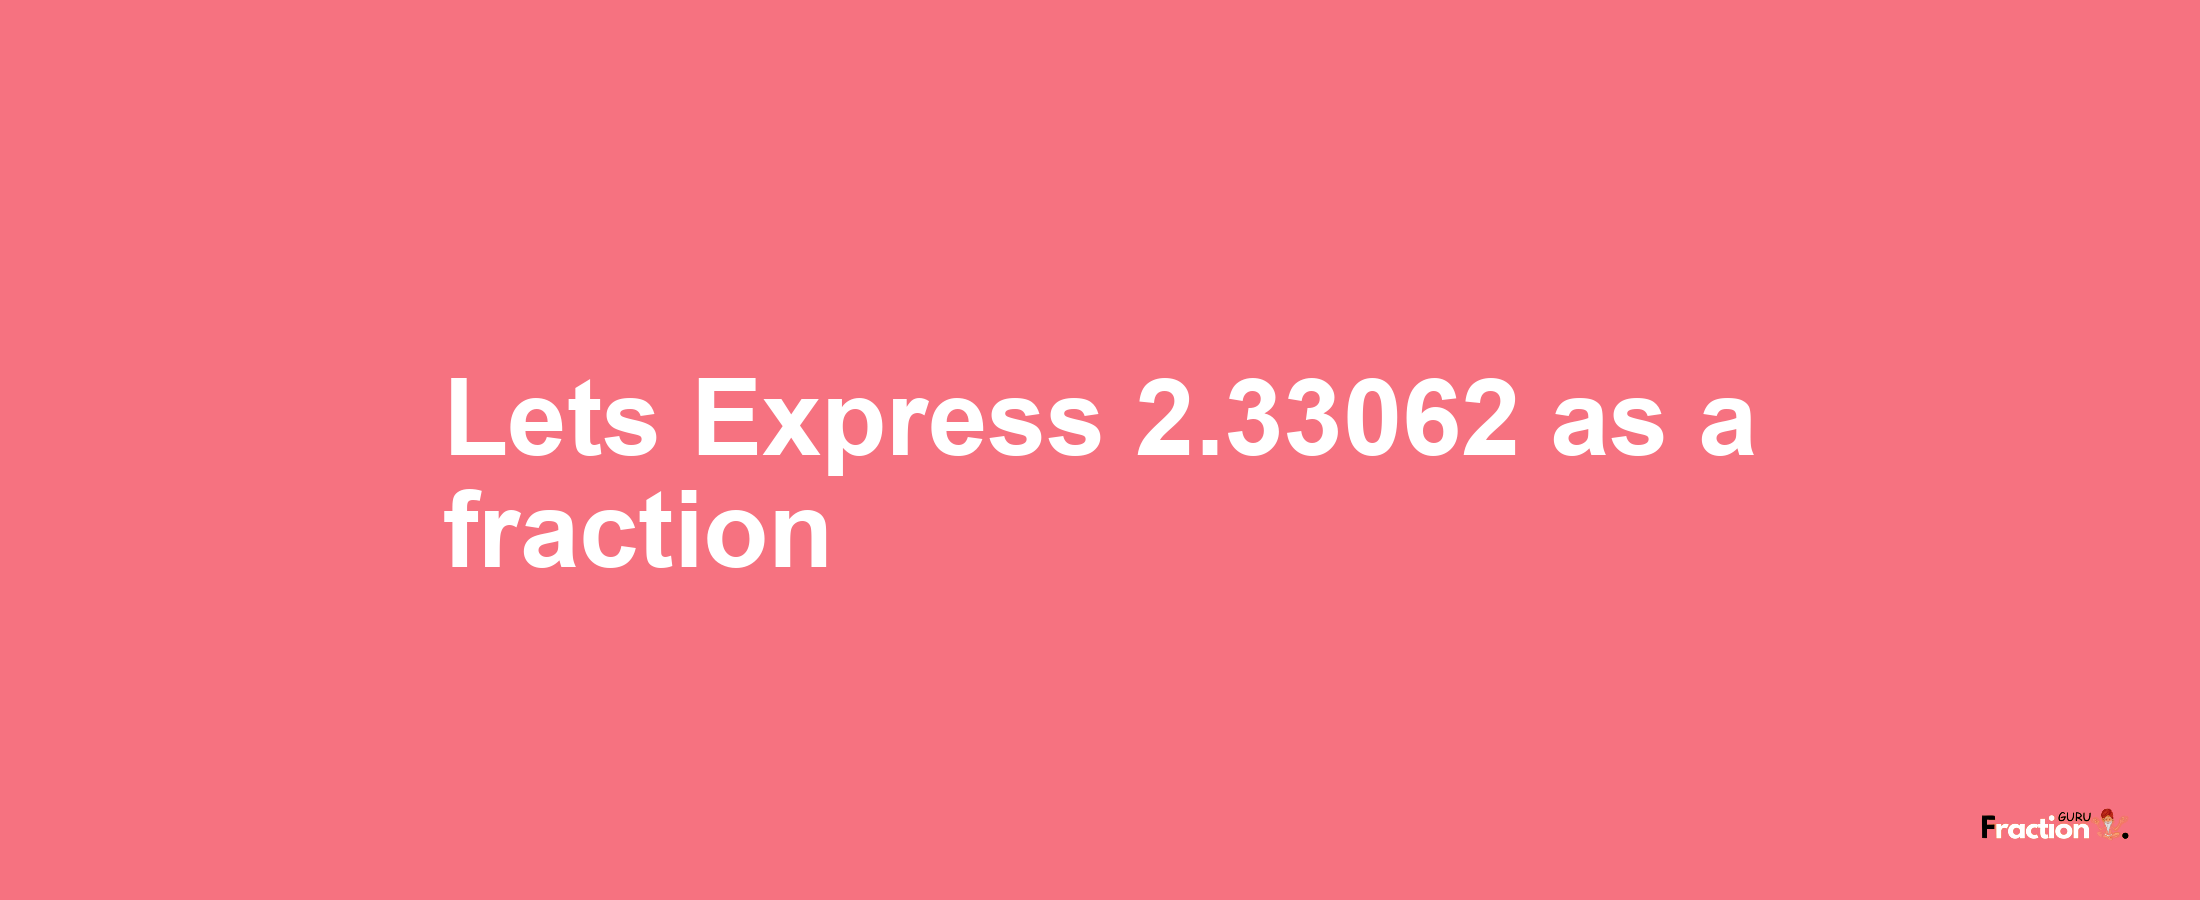 Lets Express 2.33062 as afraction